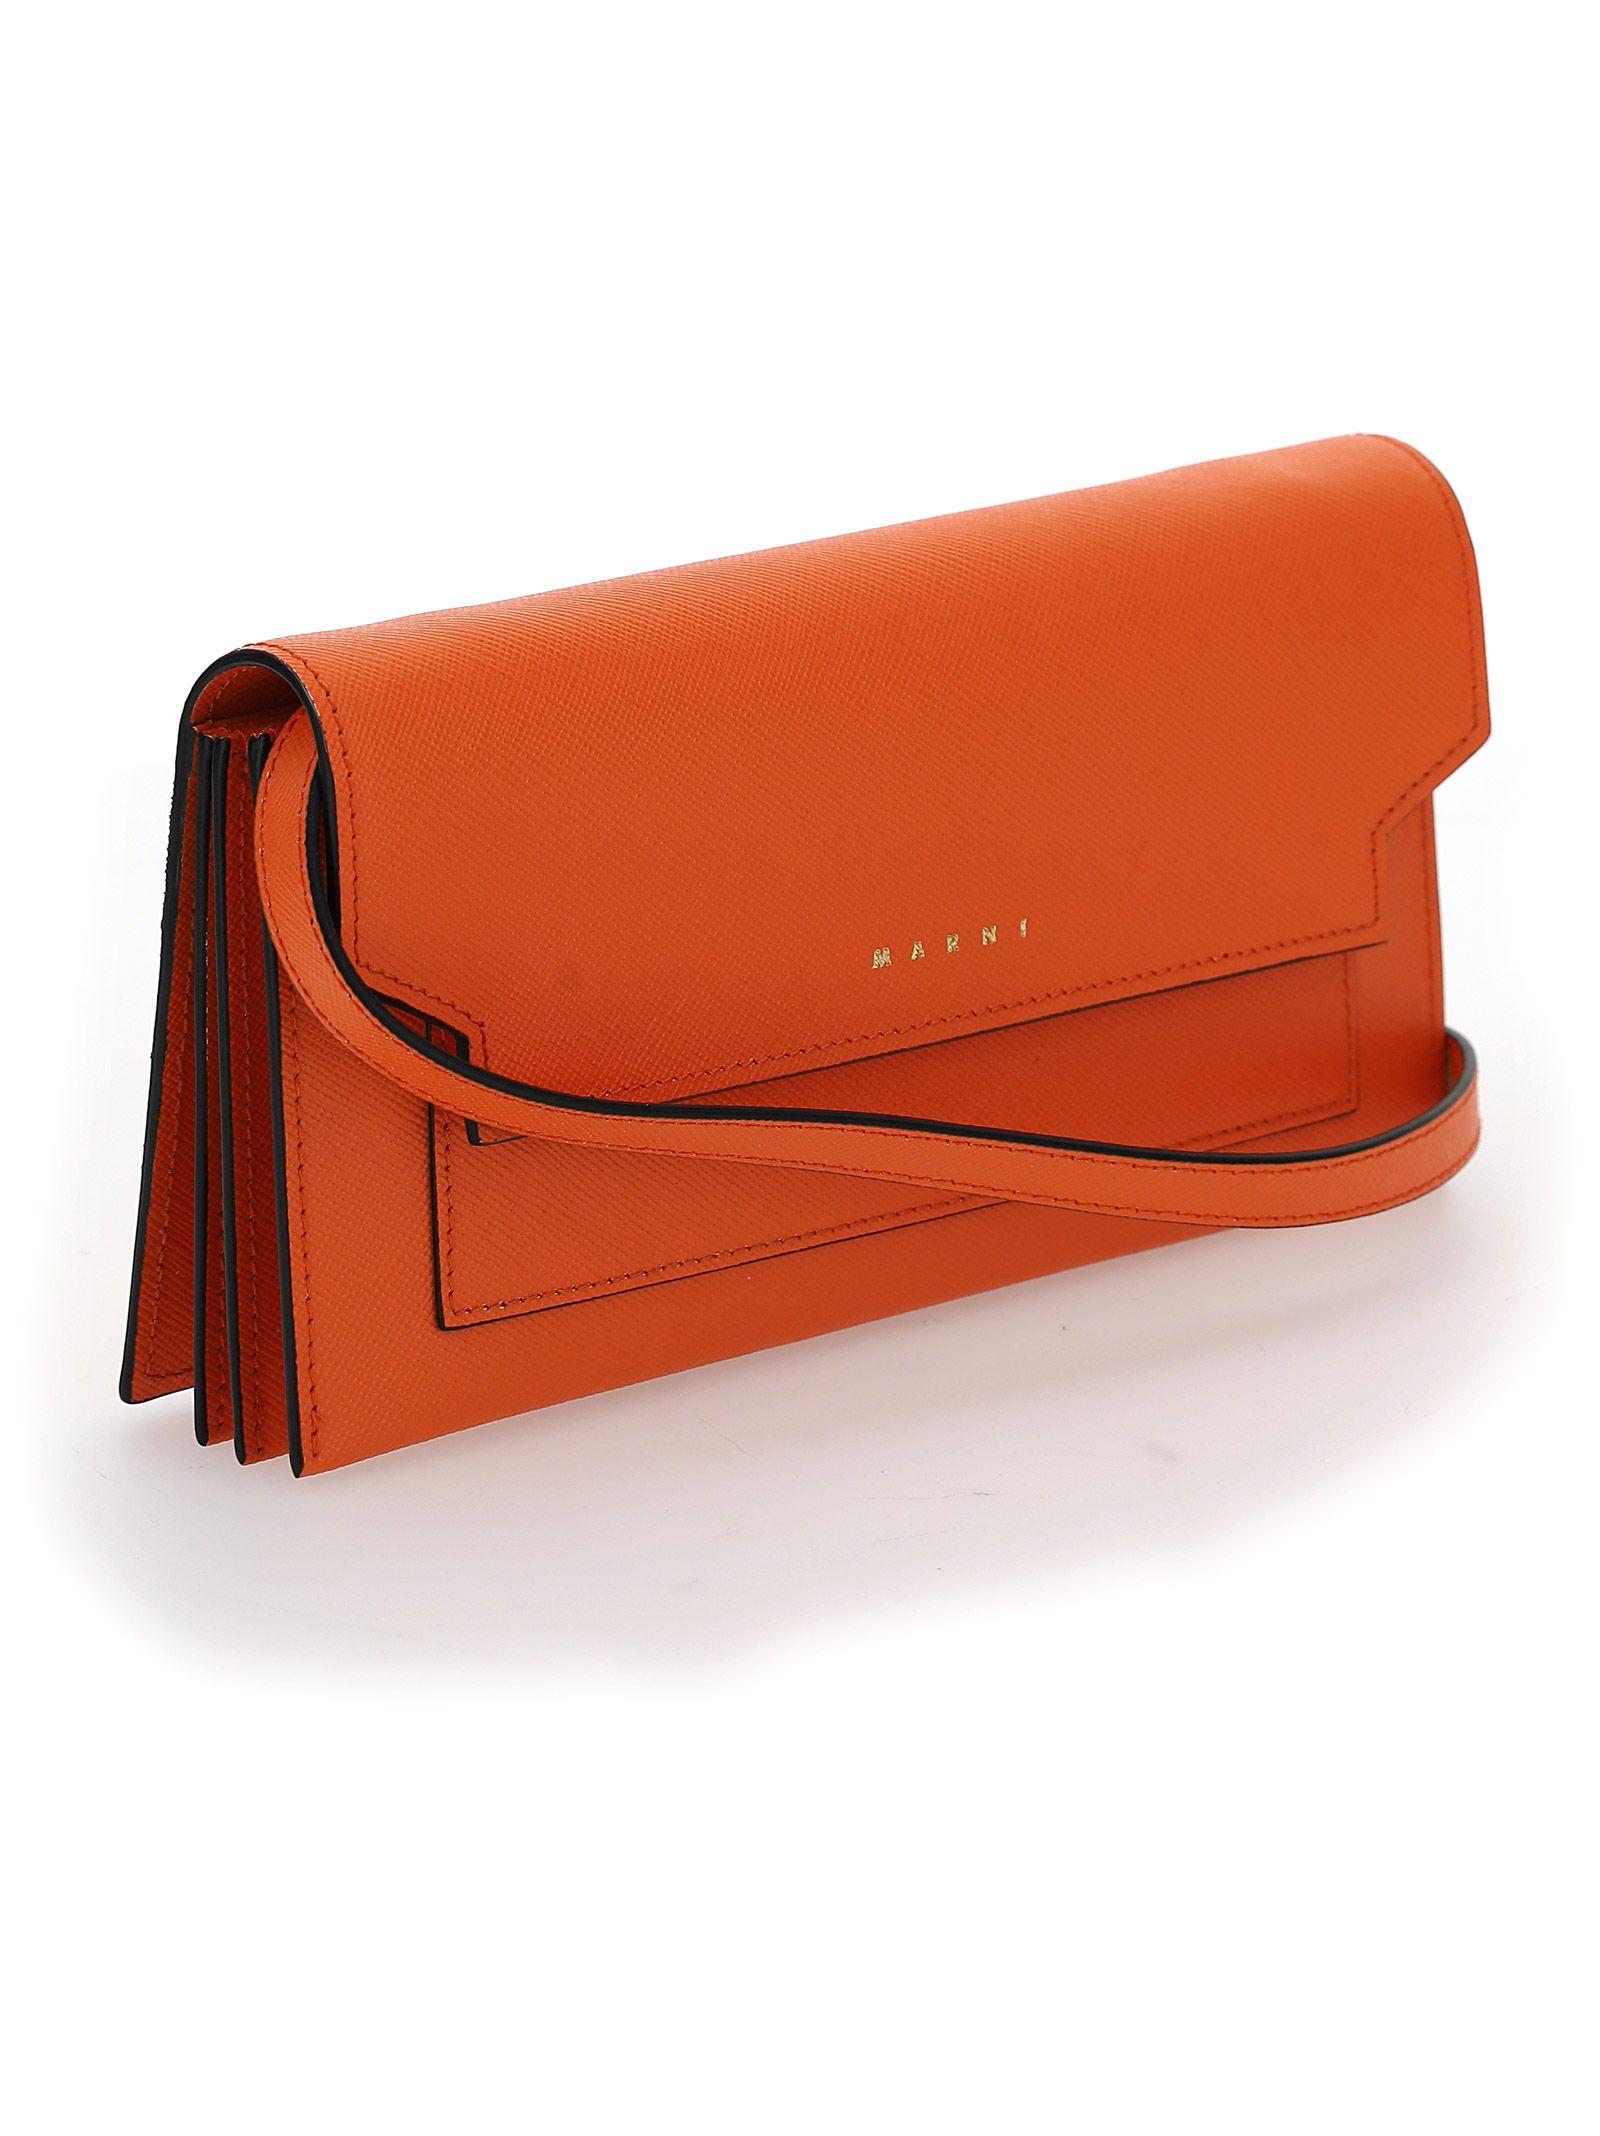 Marni Leather Pouch in Orange - Lyst